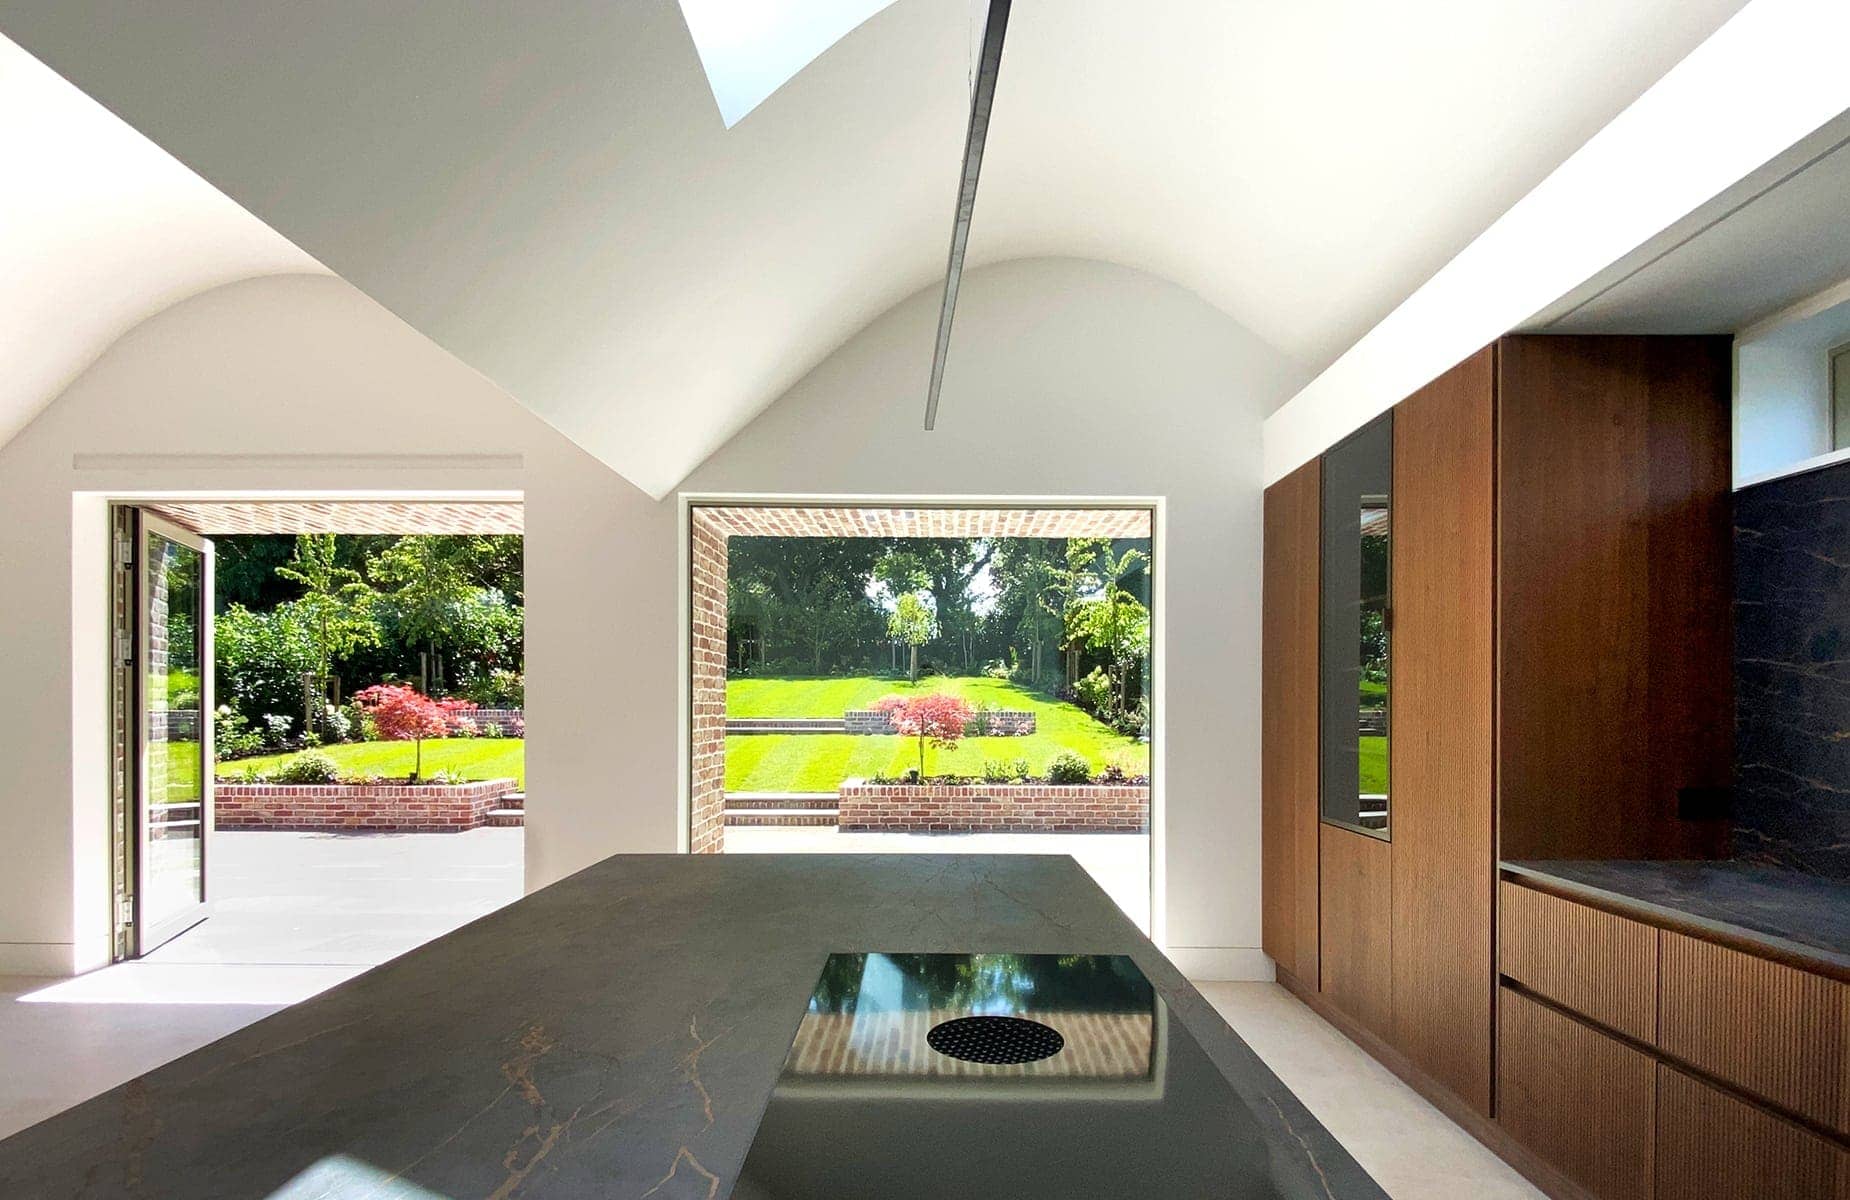 Vaulted ceiling over built-in kitchen